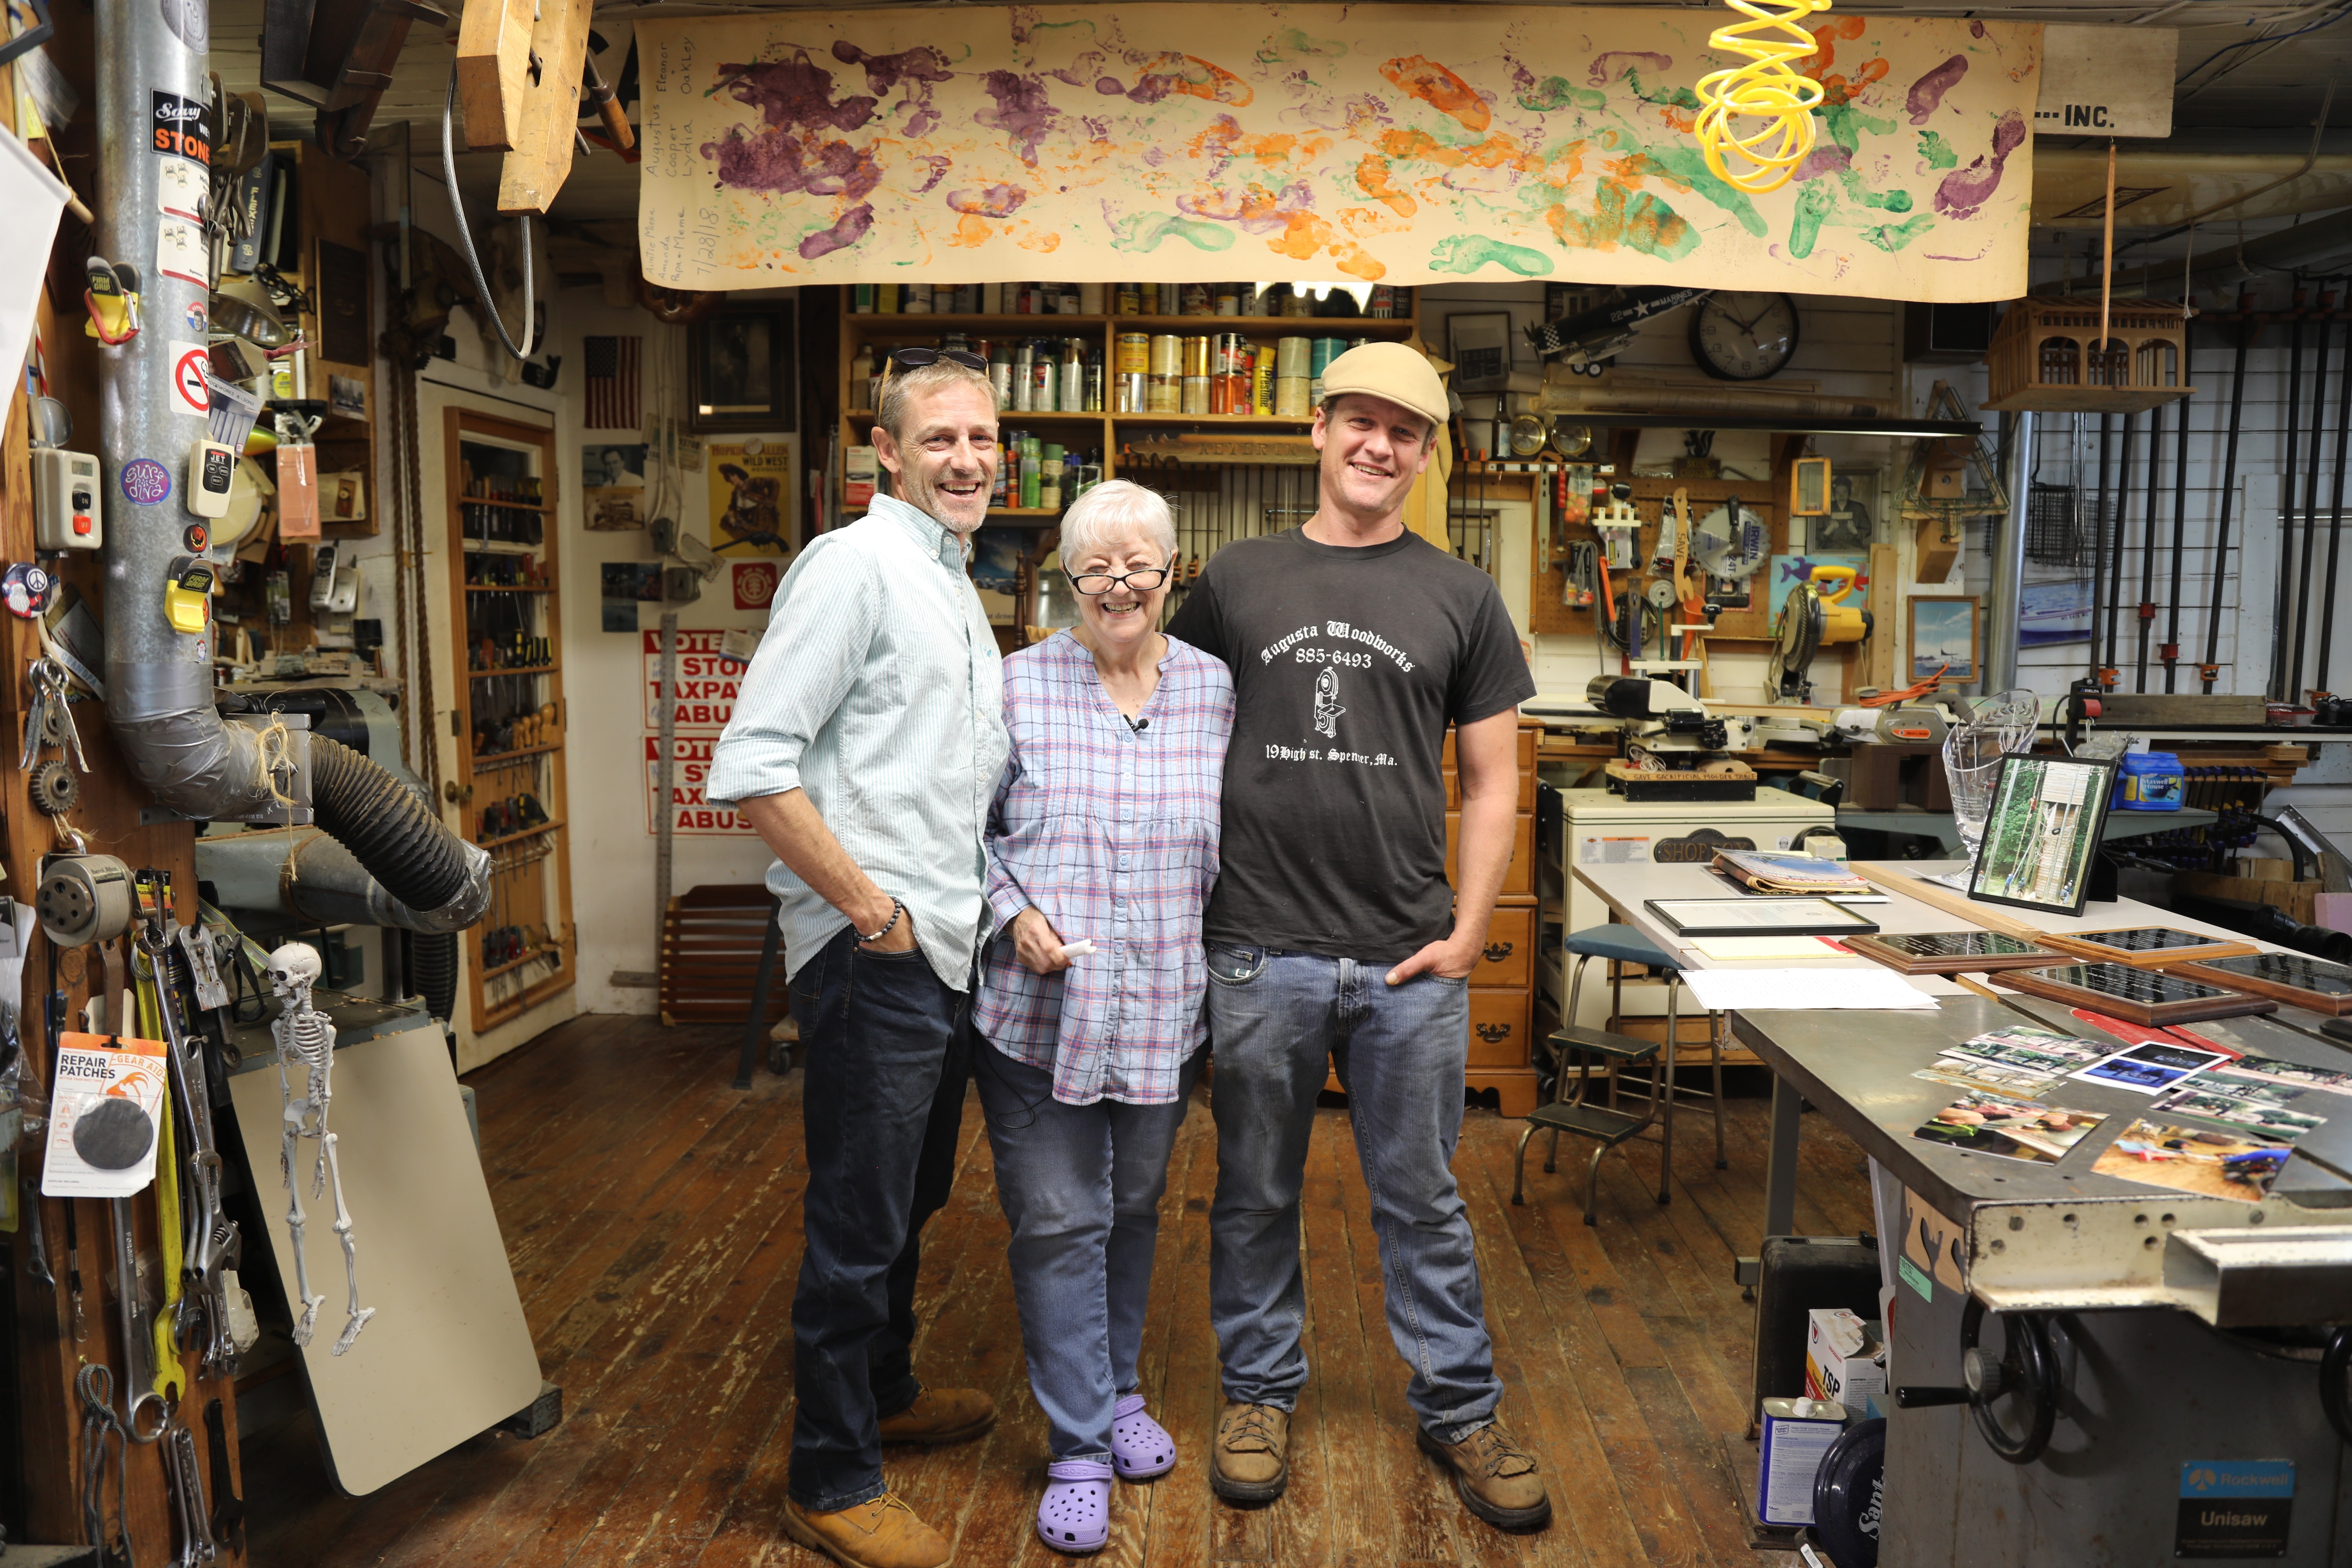 From left to right, Damon, Linda, and Justin Hopkins stand posing and smiling in Tom's woodshop. A paper banner hangs above them with footprints and handprints in orange, purple, and green paint. The woodshop is cluttered with Tom's awards and tools.